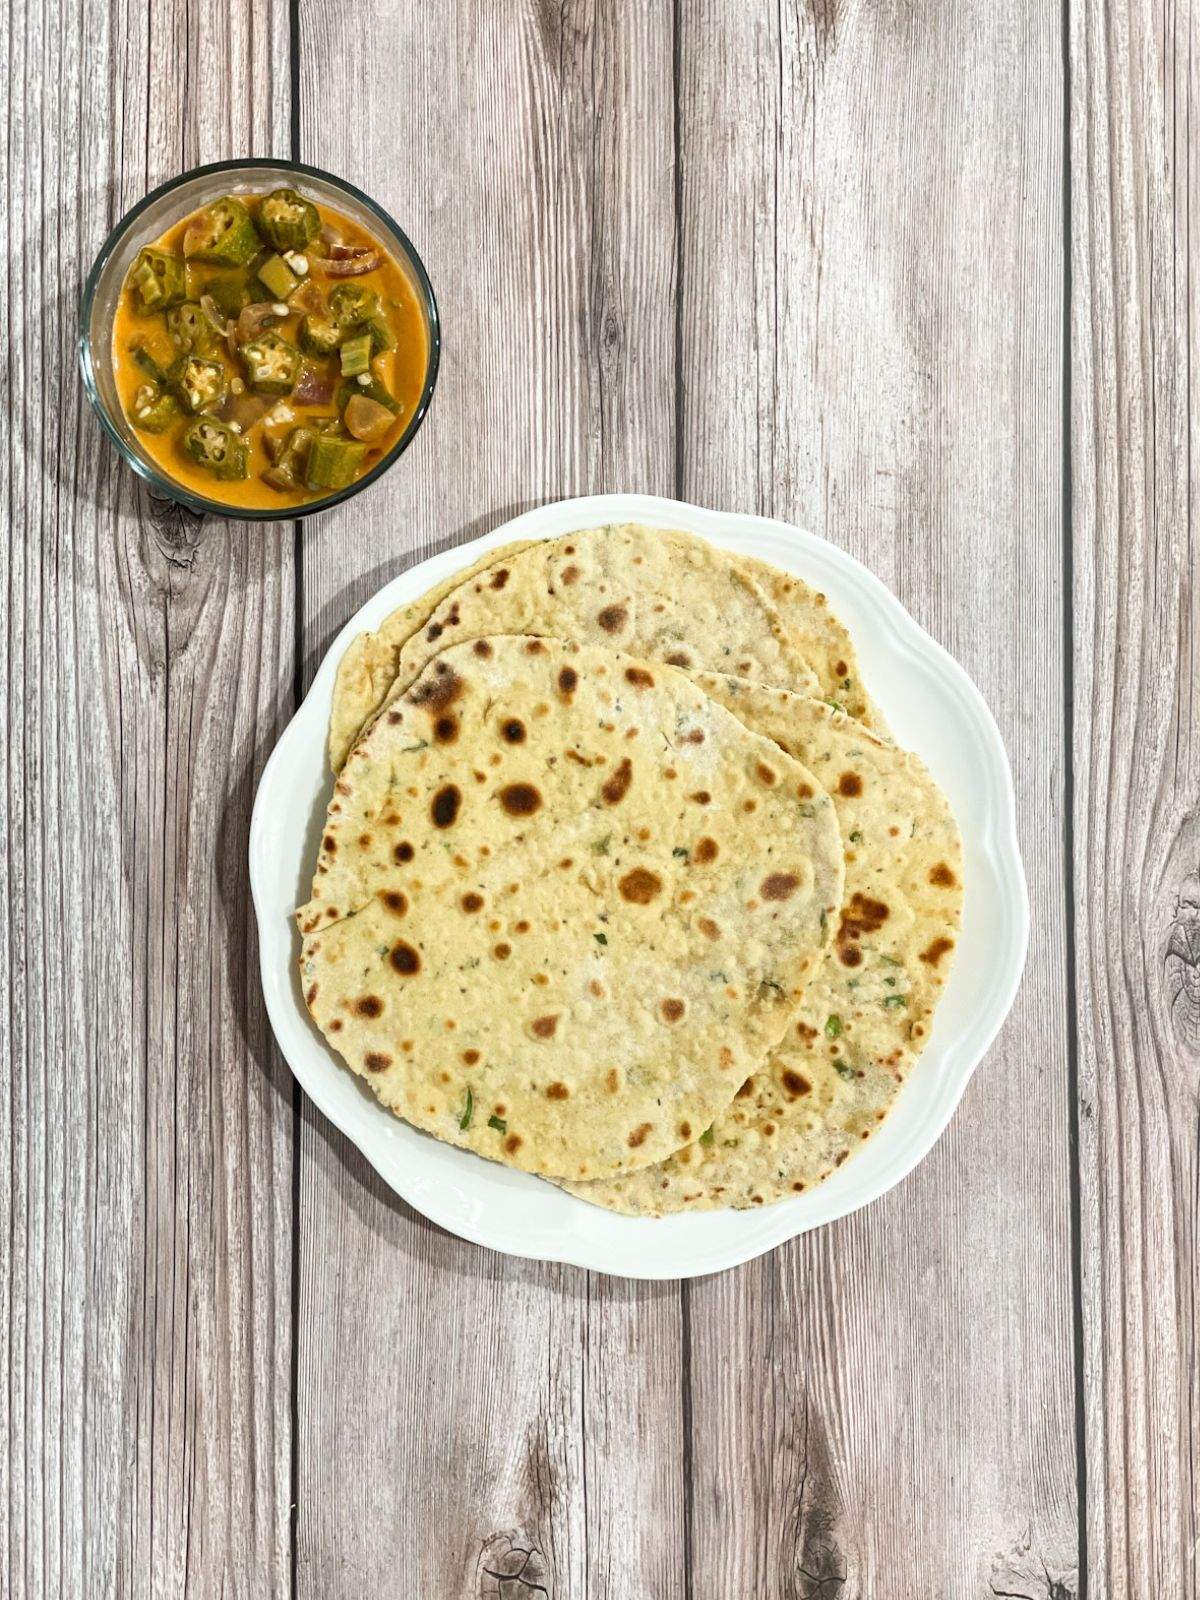 A plate is with besan rotis on the table along with bowl of curry.